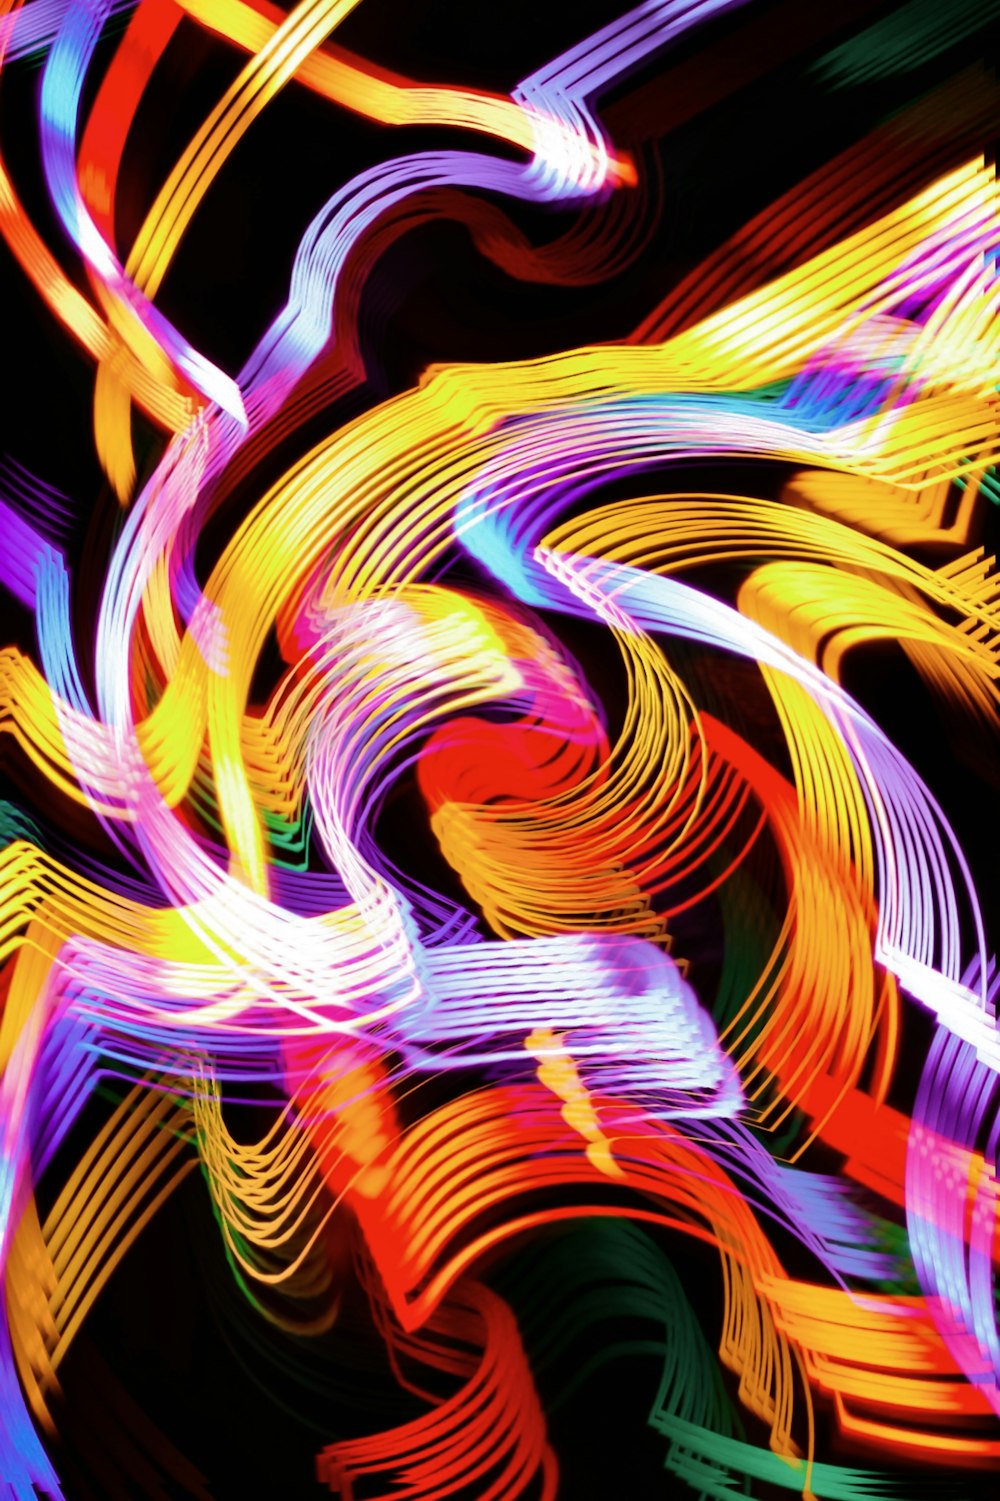 a multicolored abstract image of lines and curves